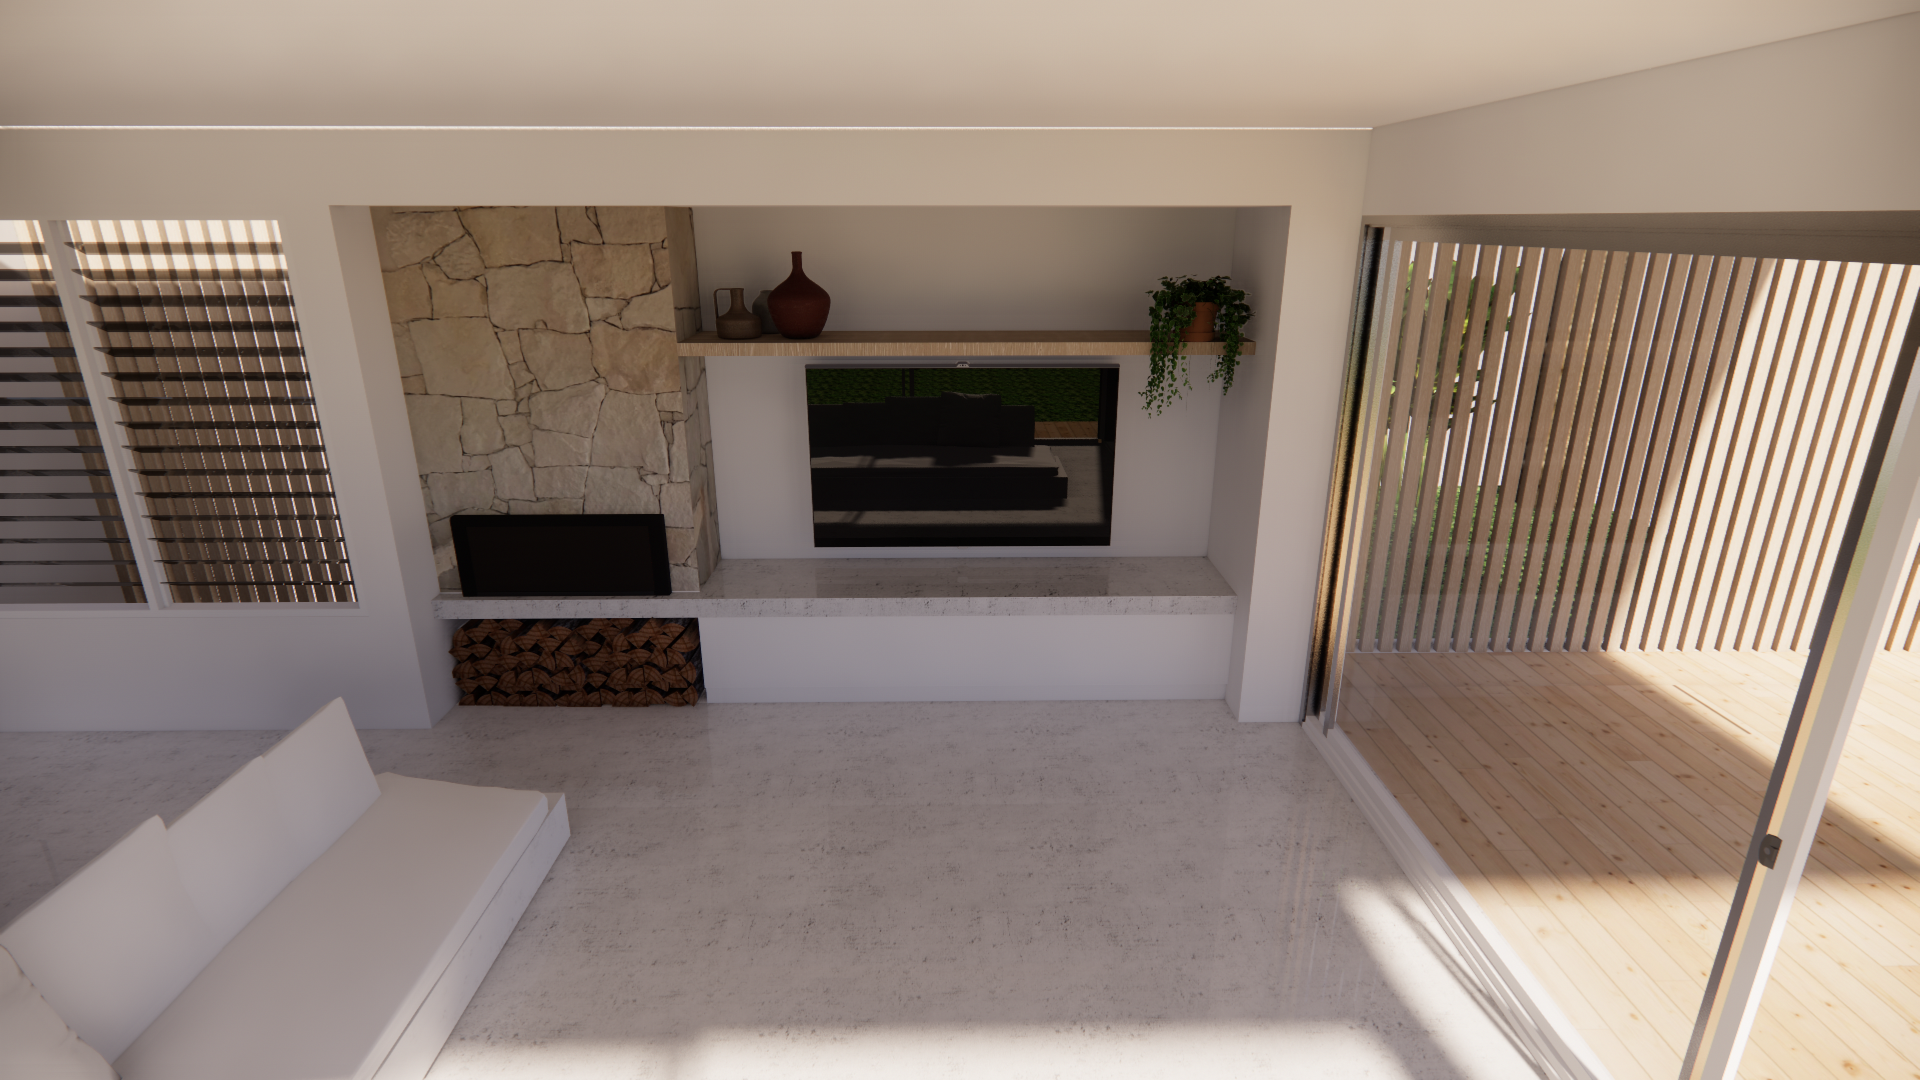 Fireplace final 2.png